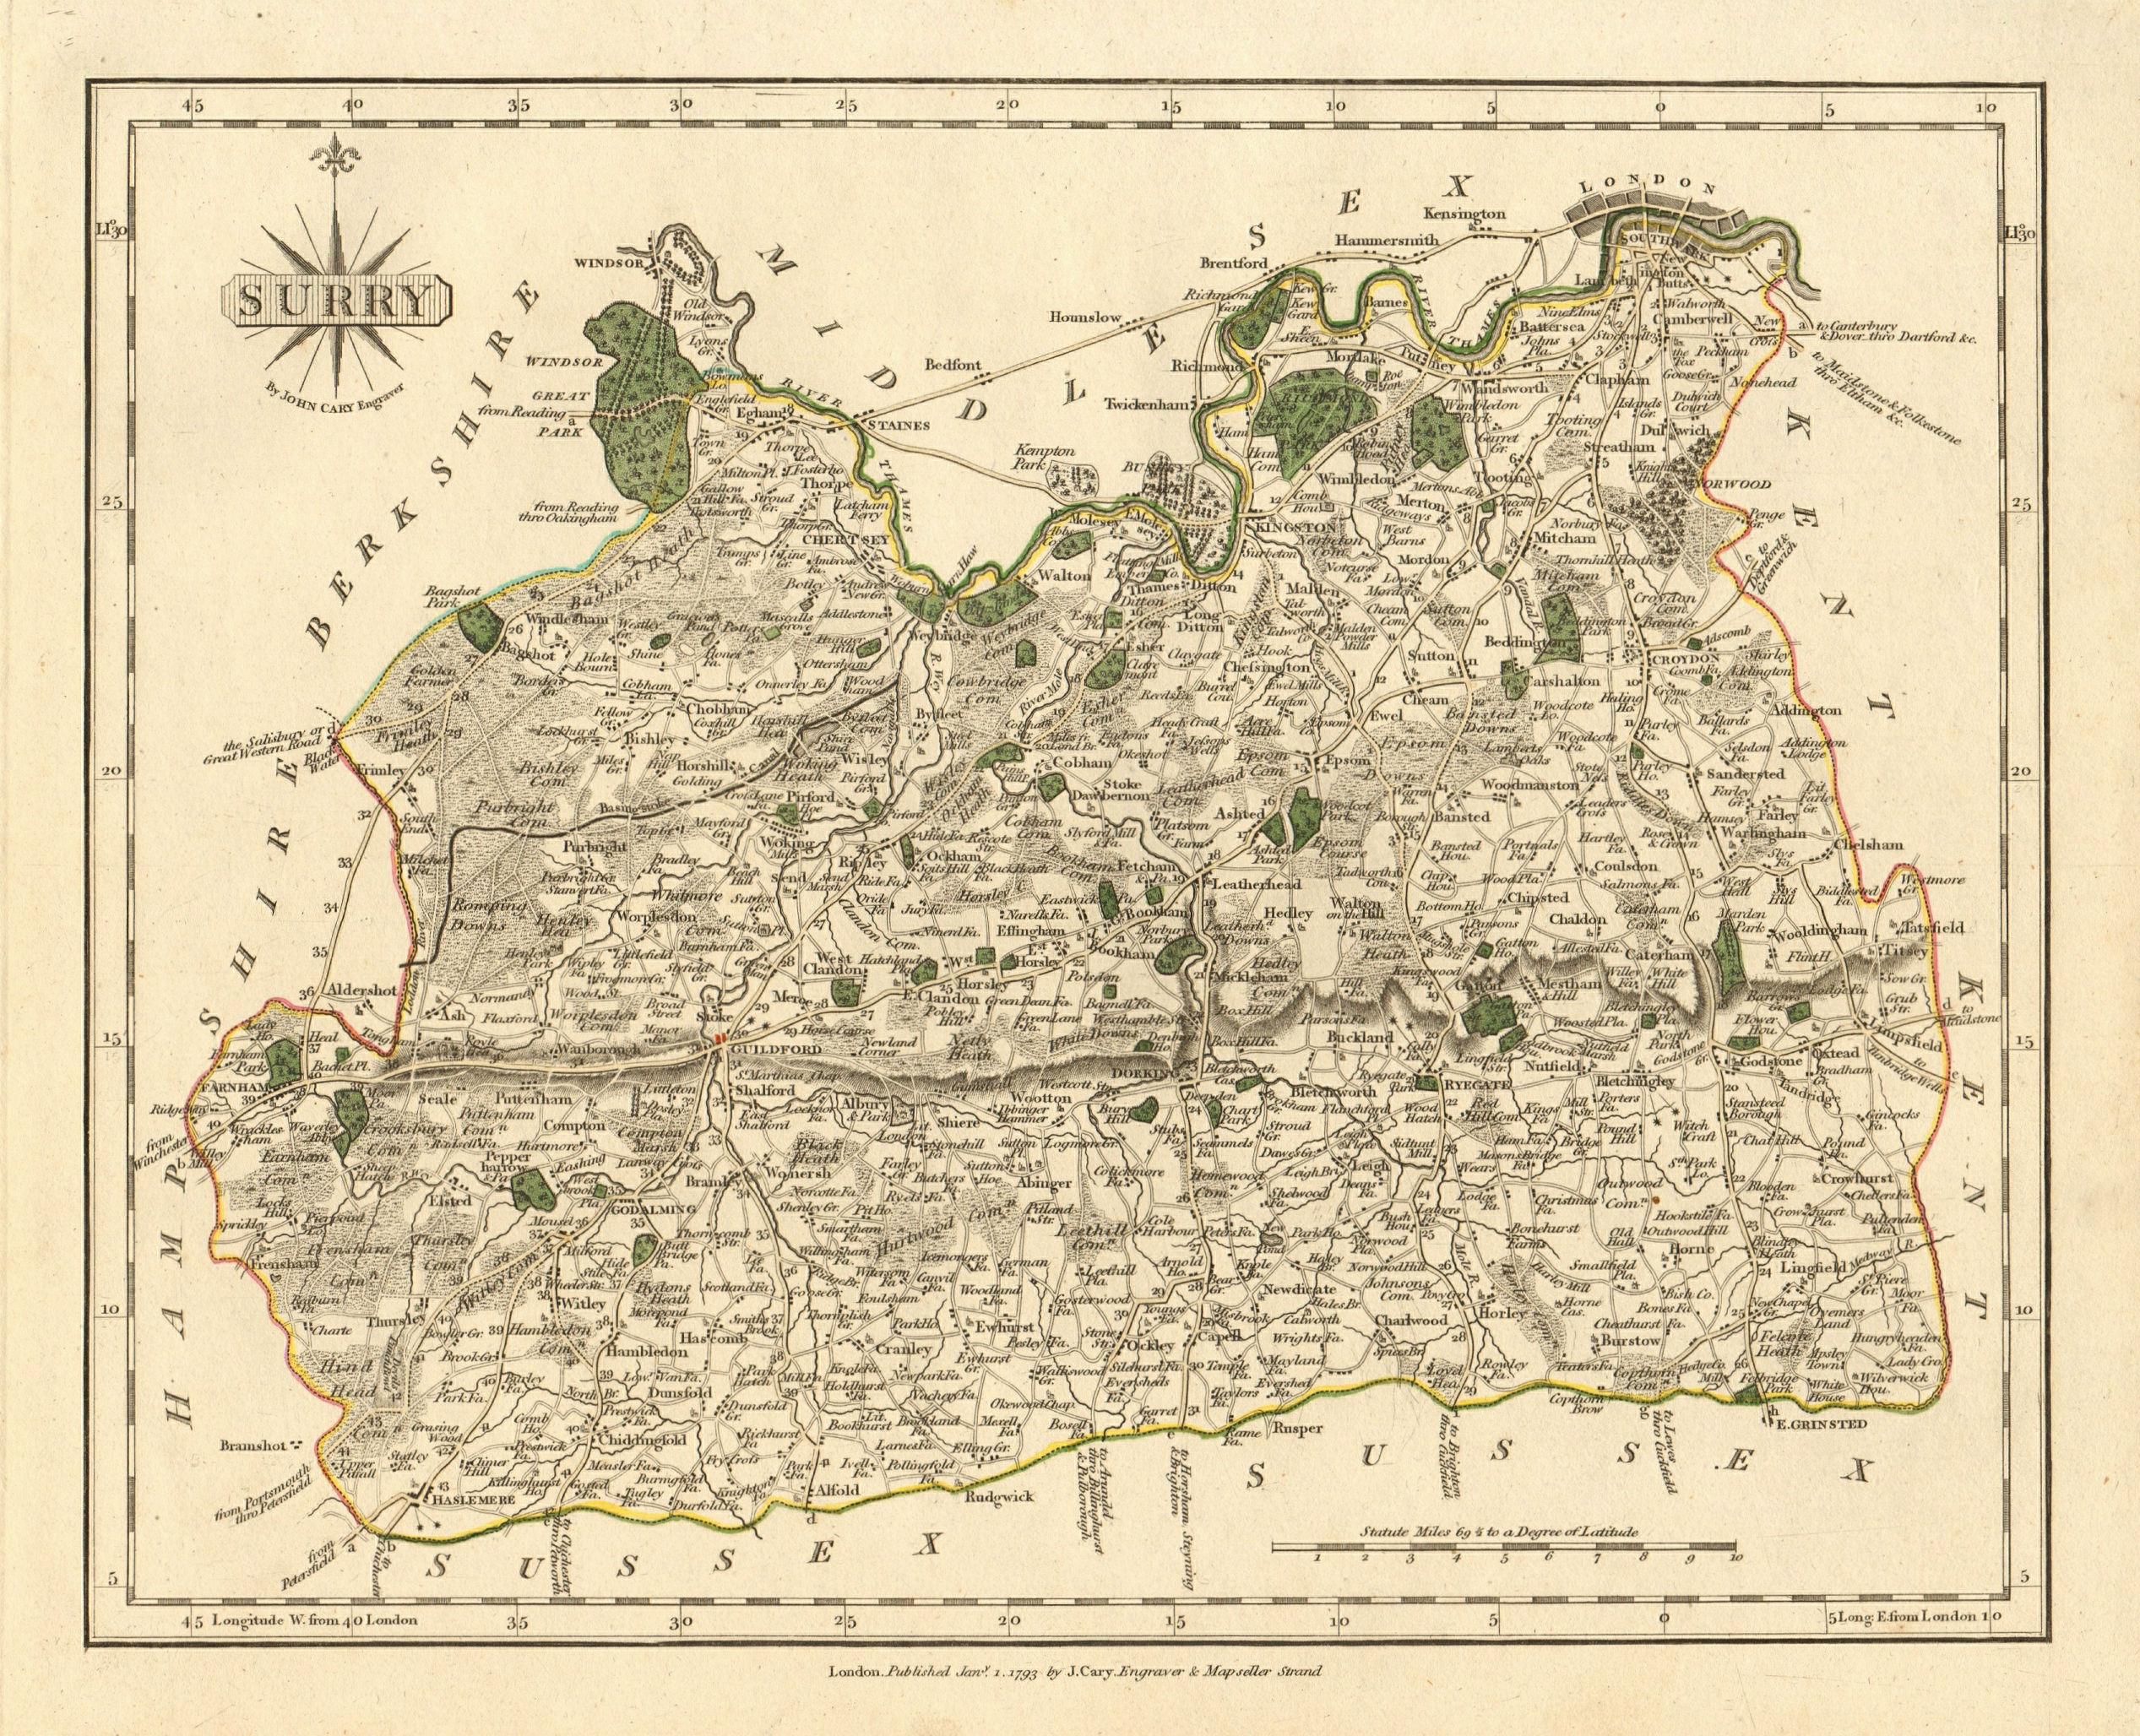 Antique county map of SURREY by JOHN CARY. Original outline colour 1793